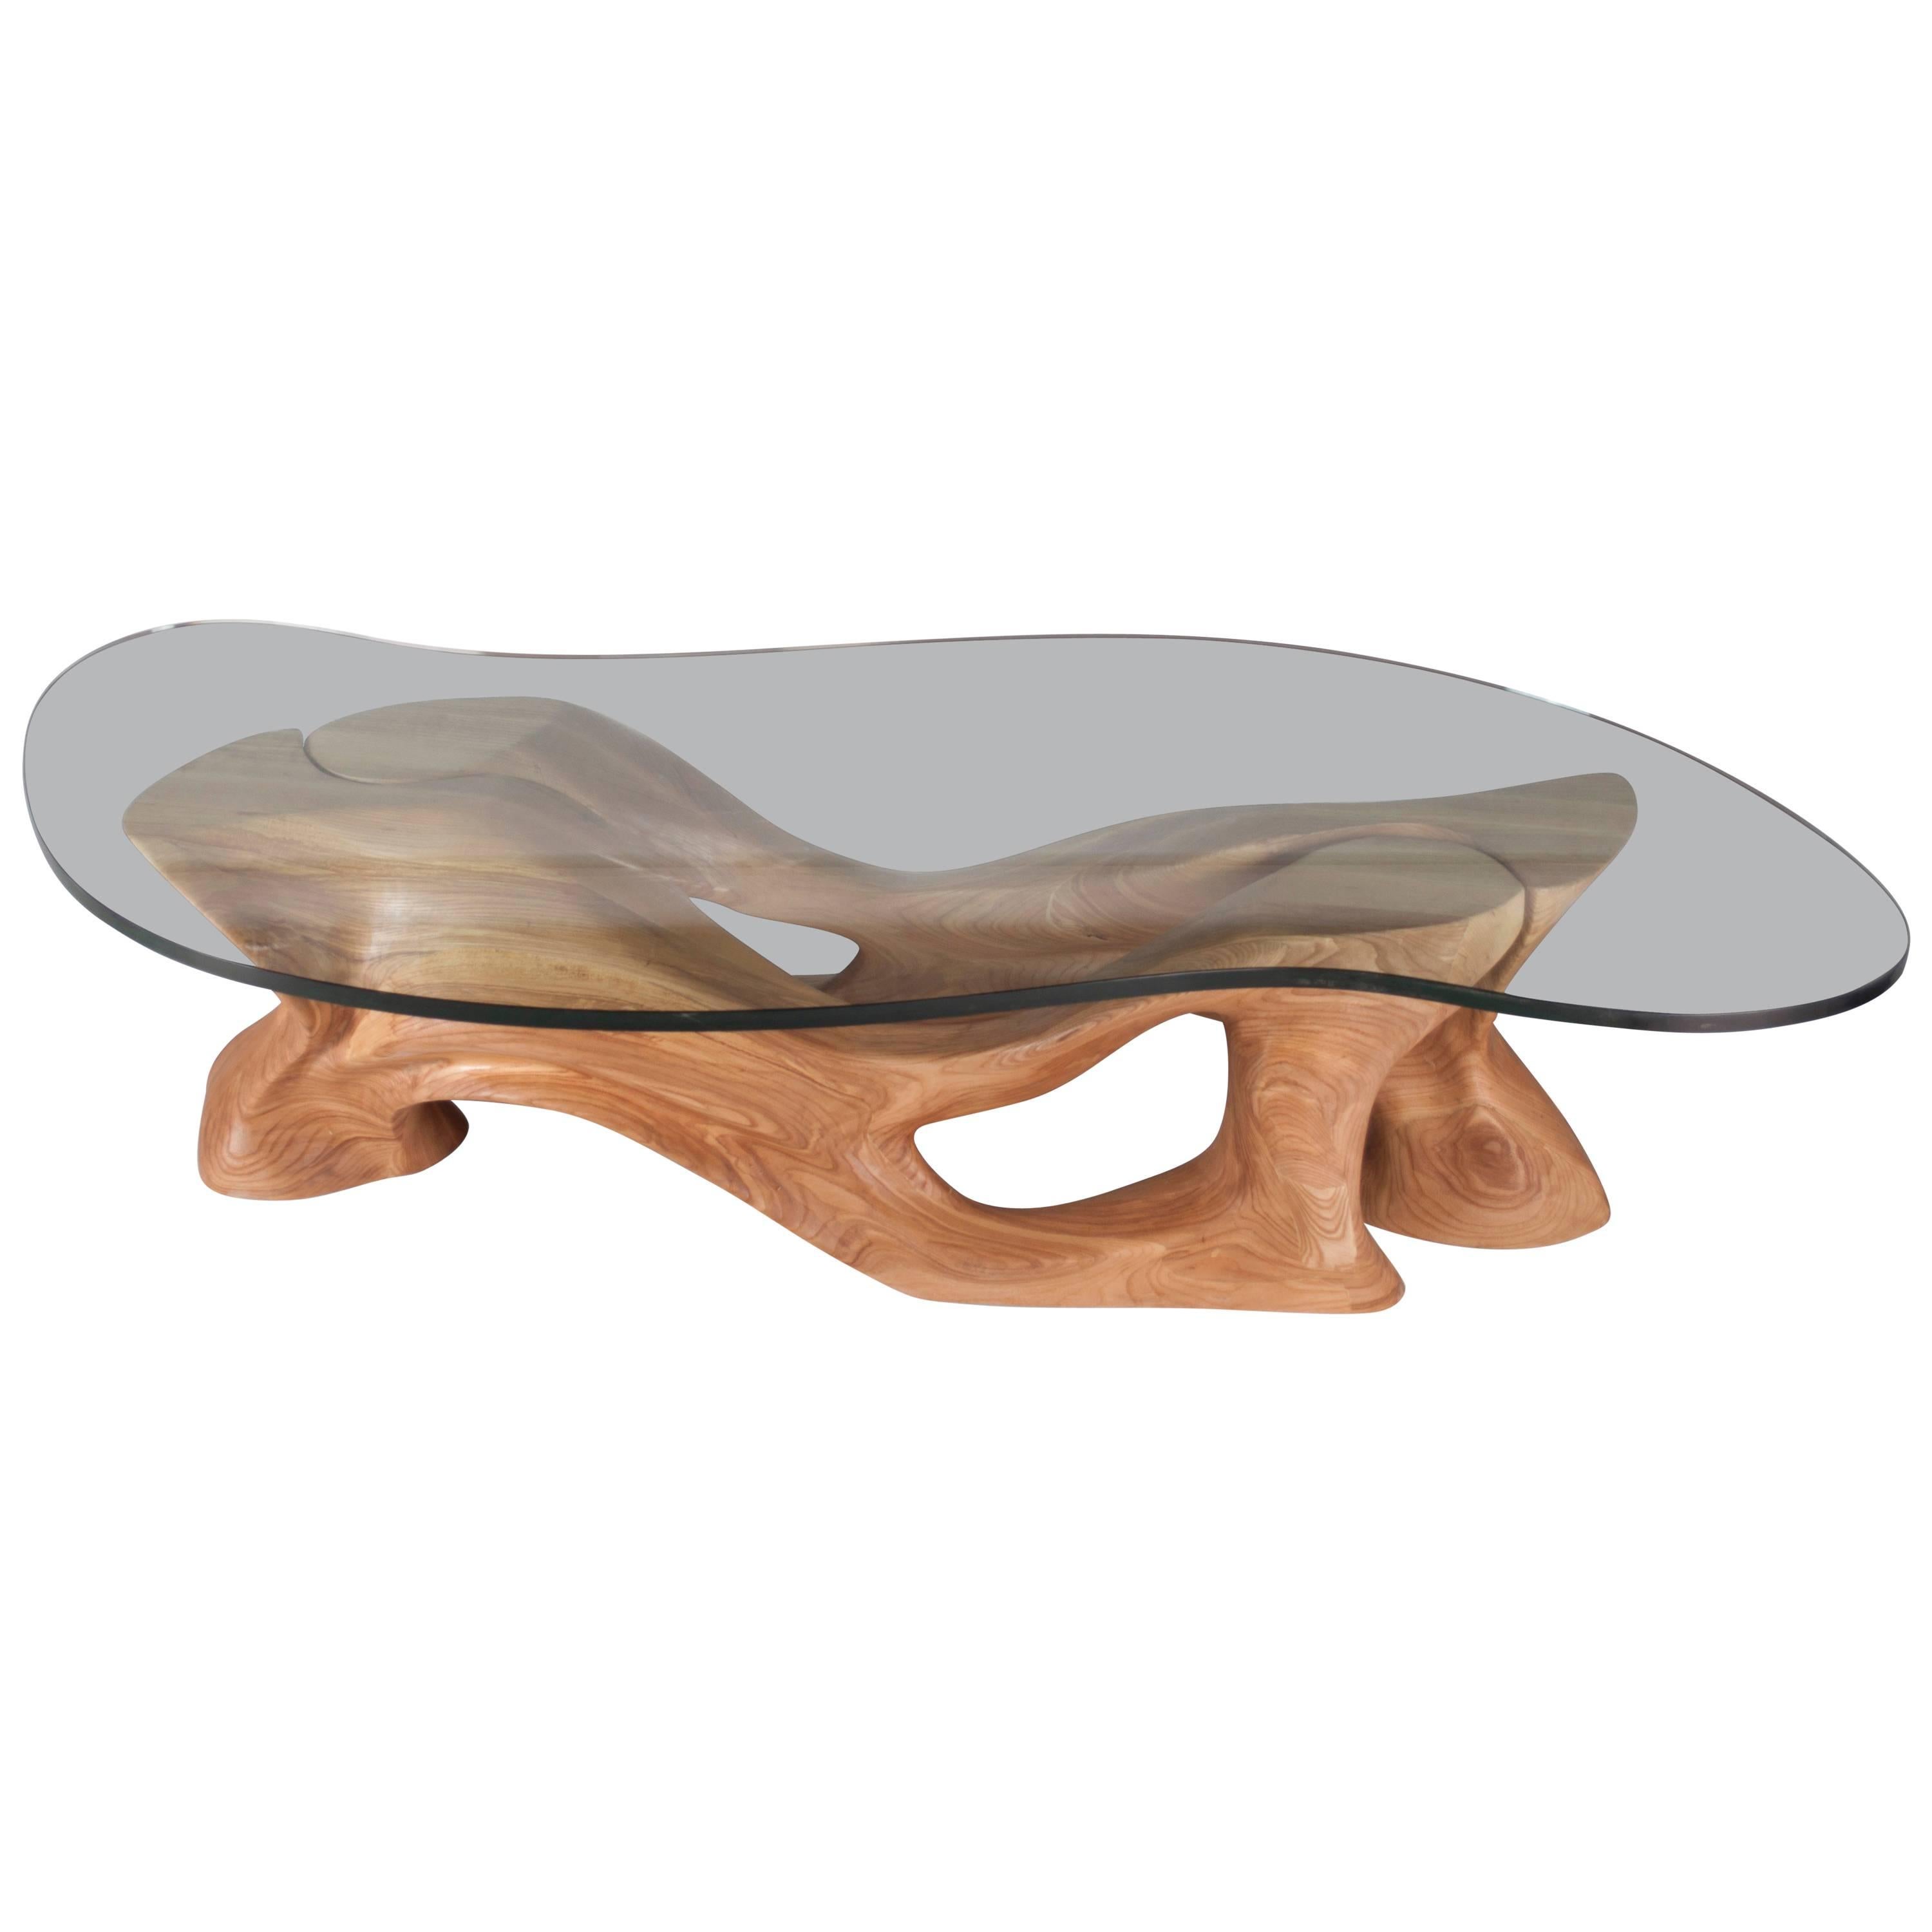 Amorph Crux Coffee Table Honey stain on Ash wood with Organic Shaped Glass For Sale